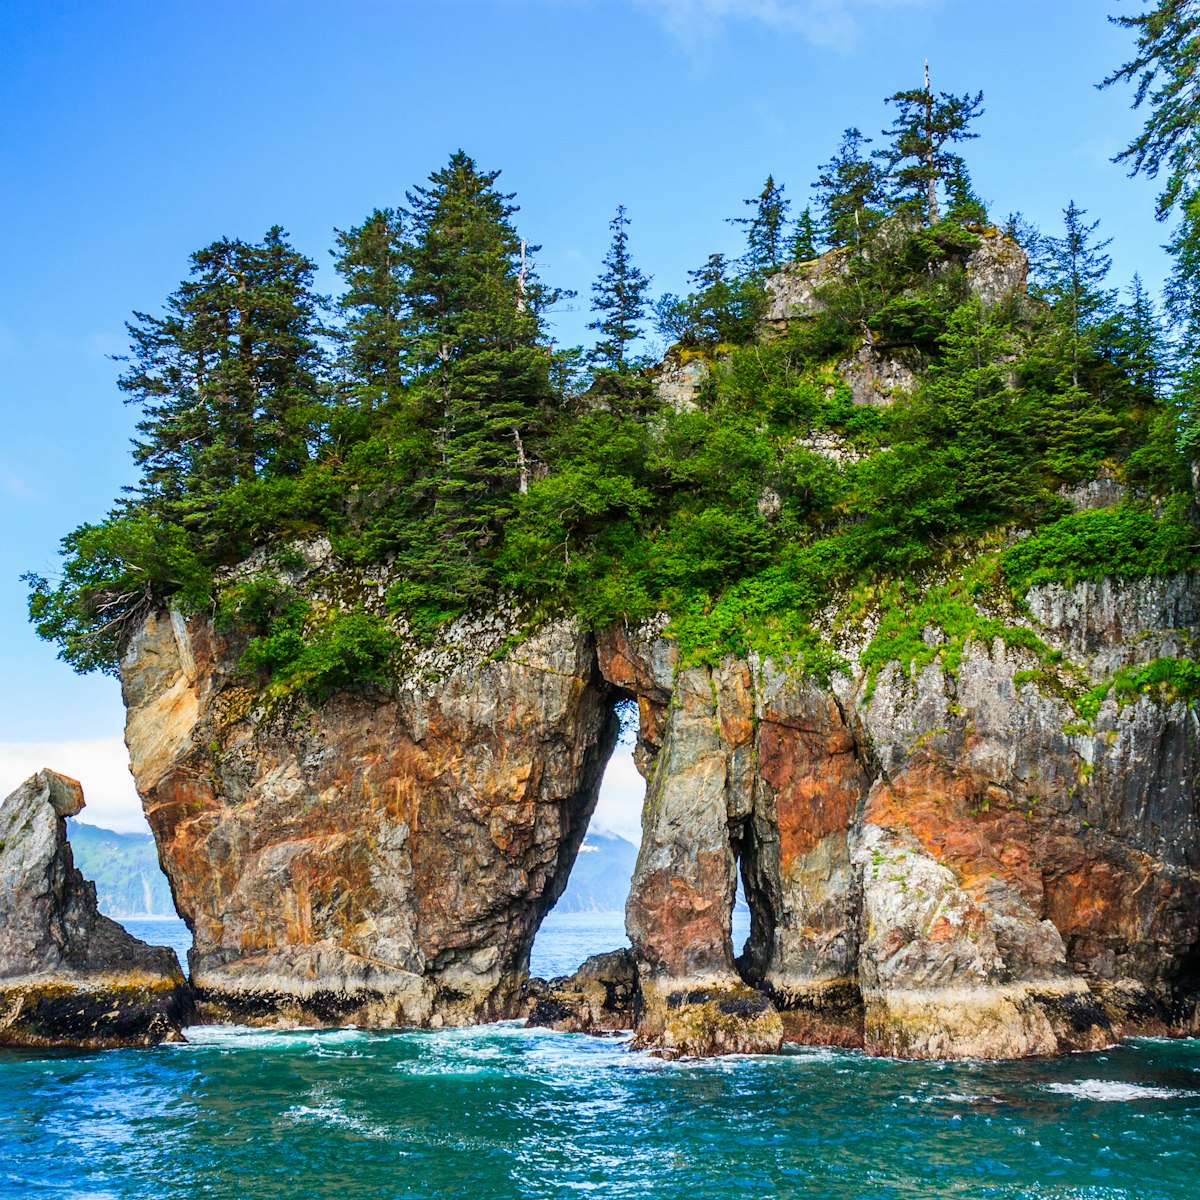 Window Rock, a natural rock formation in Kenai Fjords National Park.